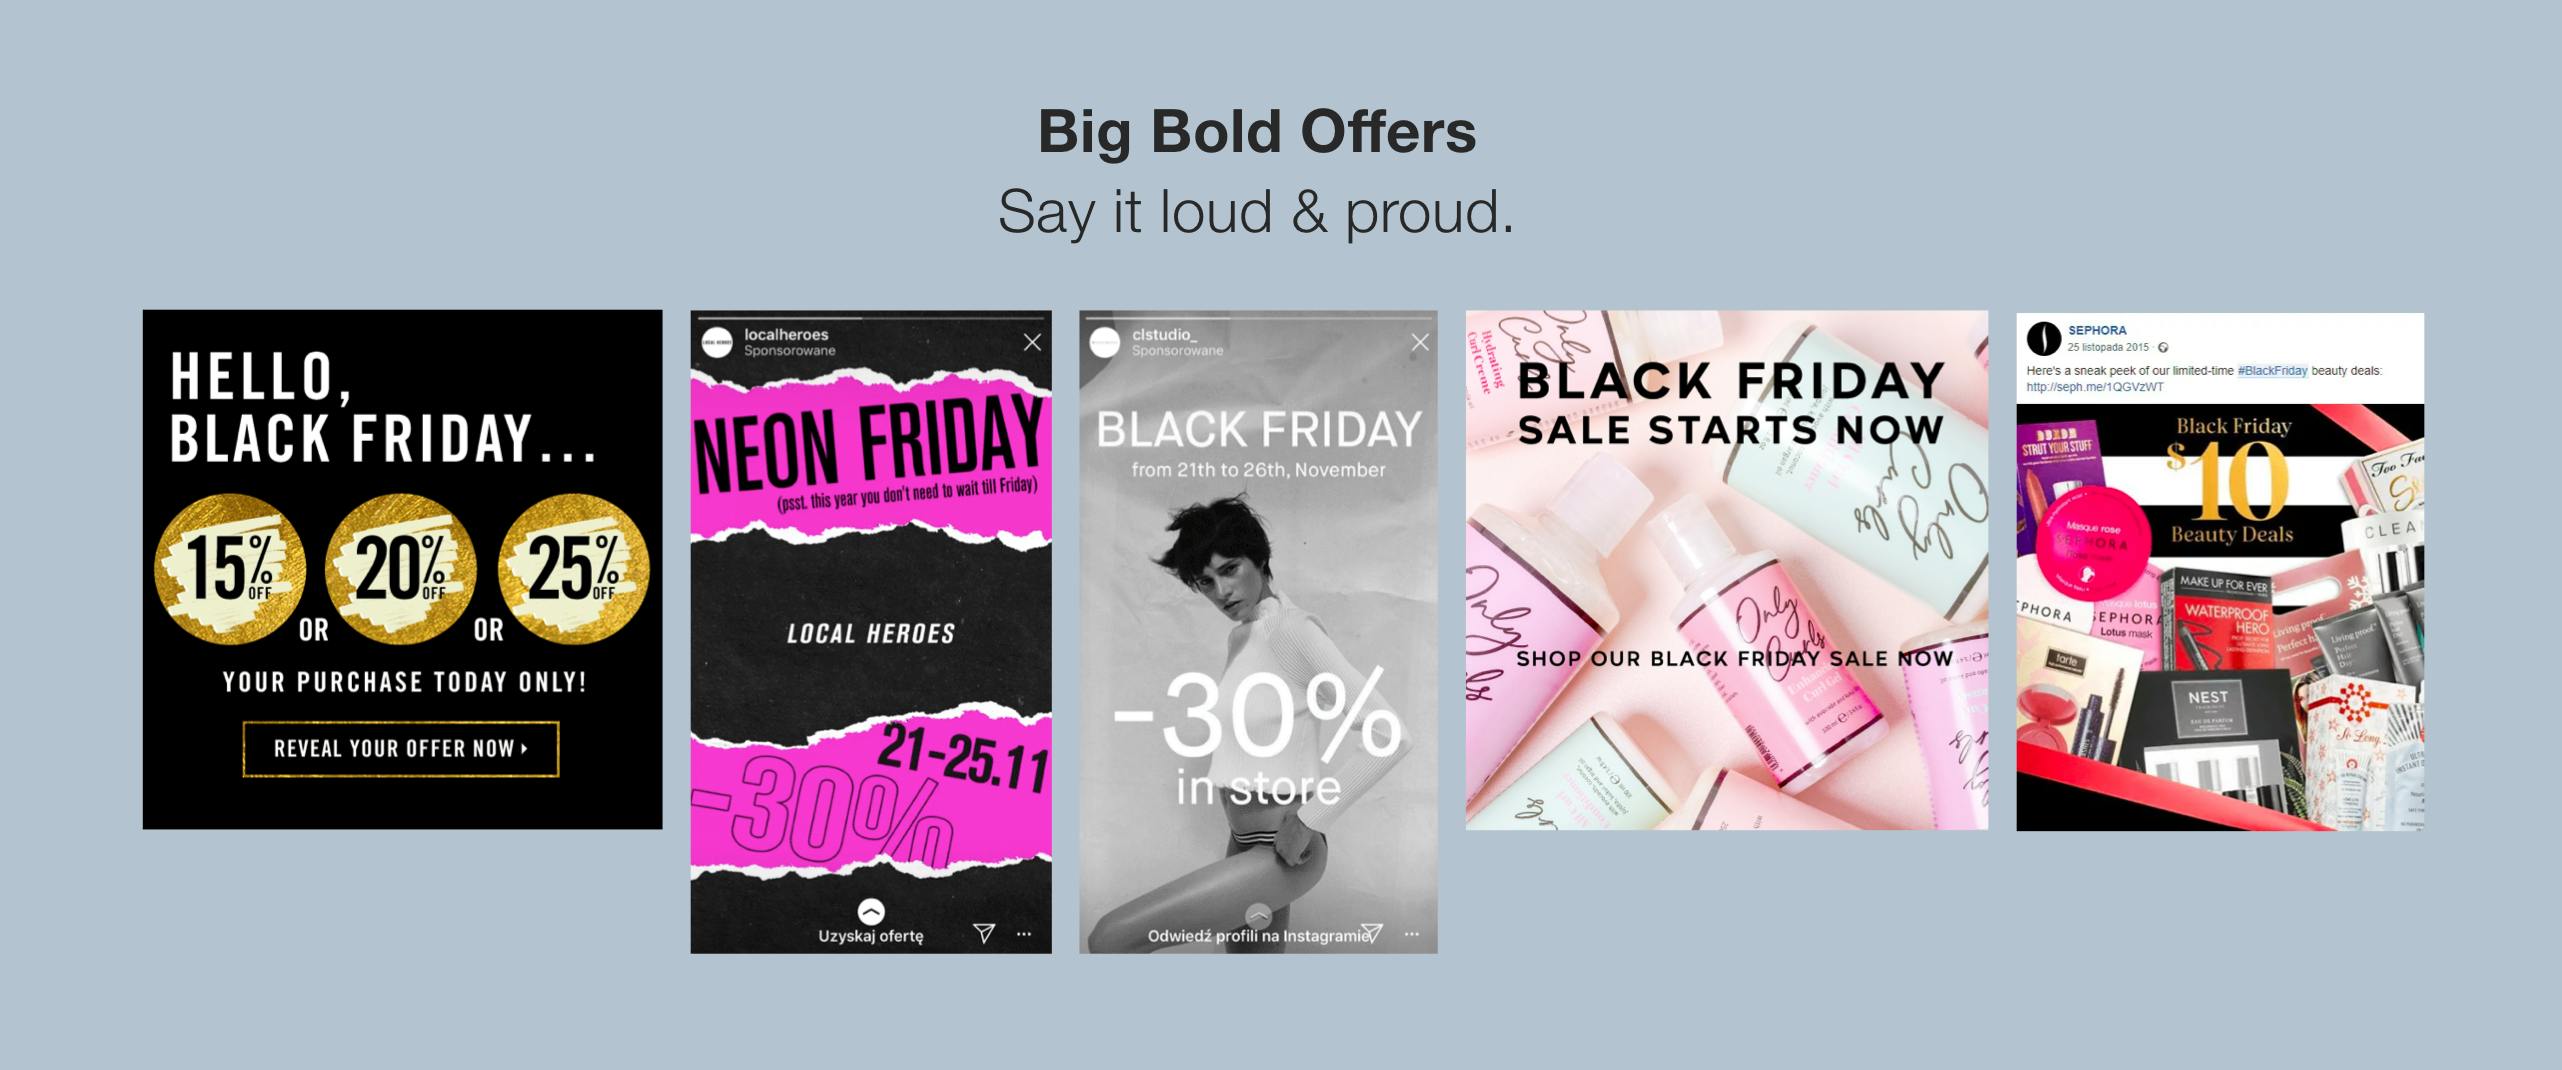 big bold bfcm offer creative examples